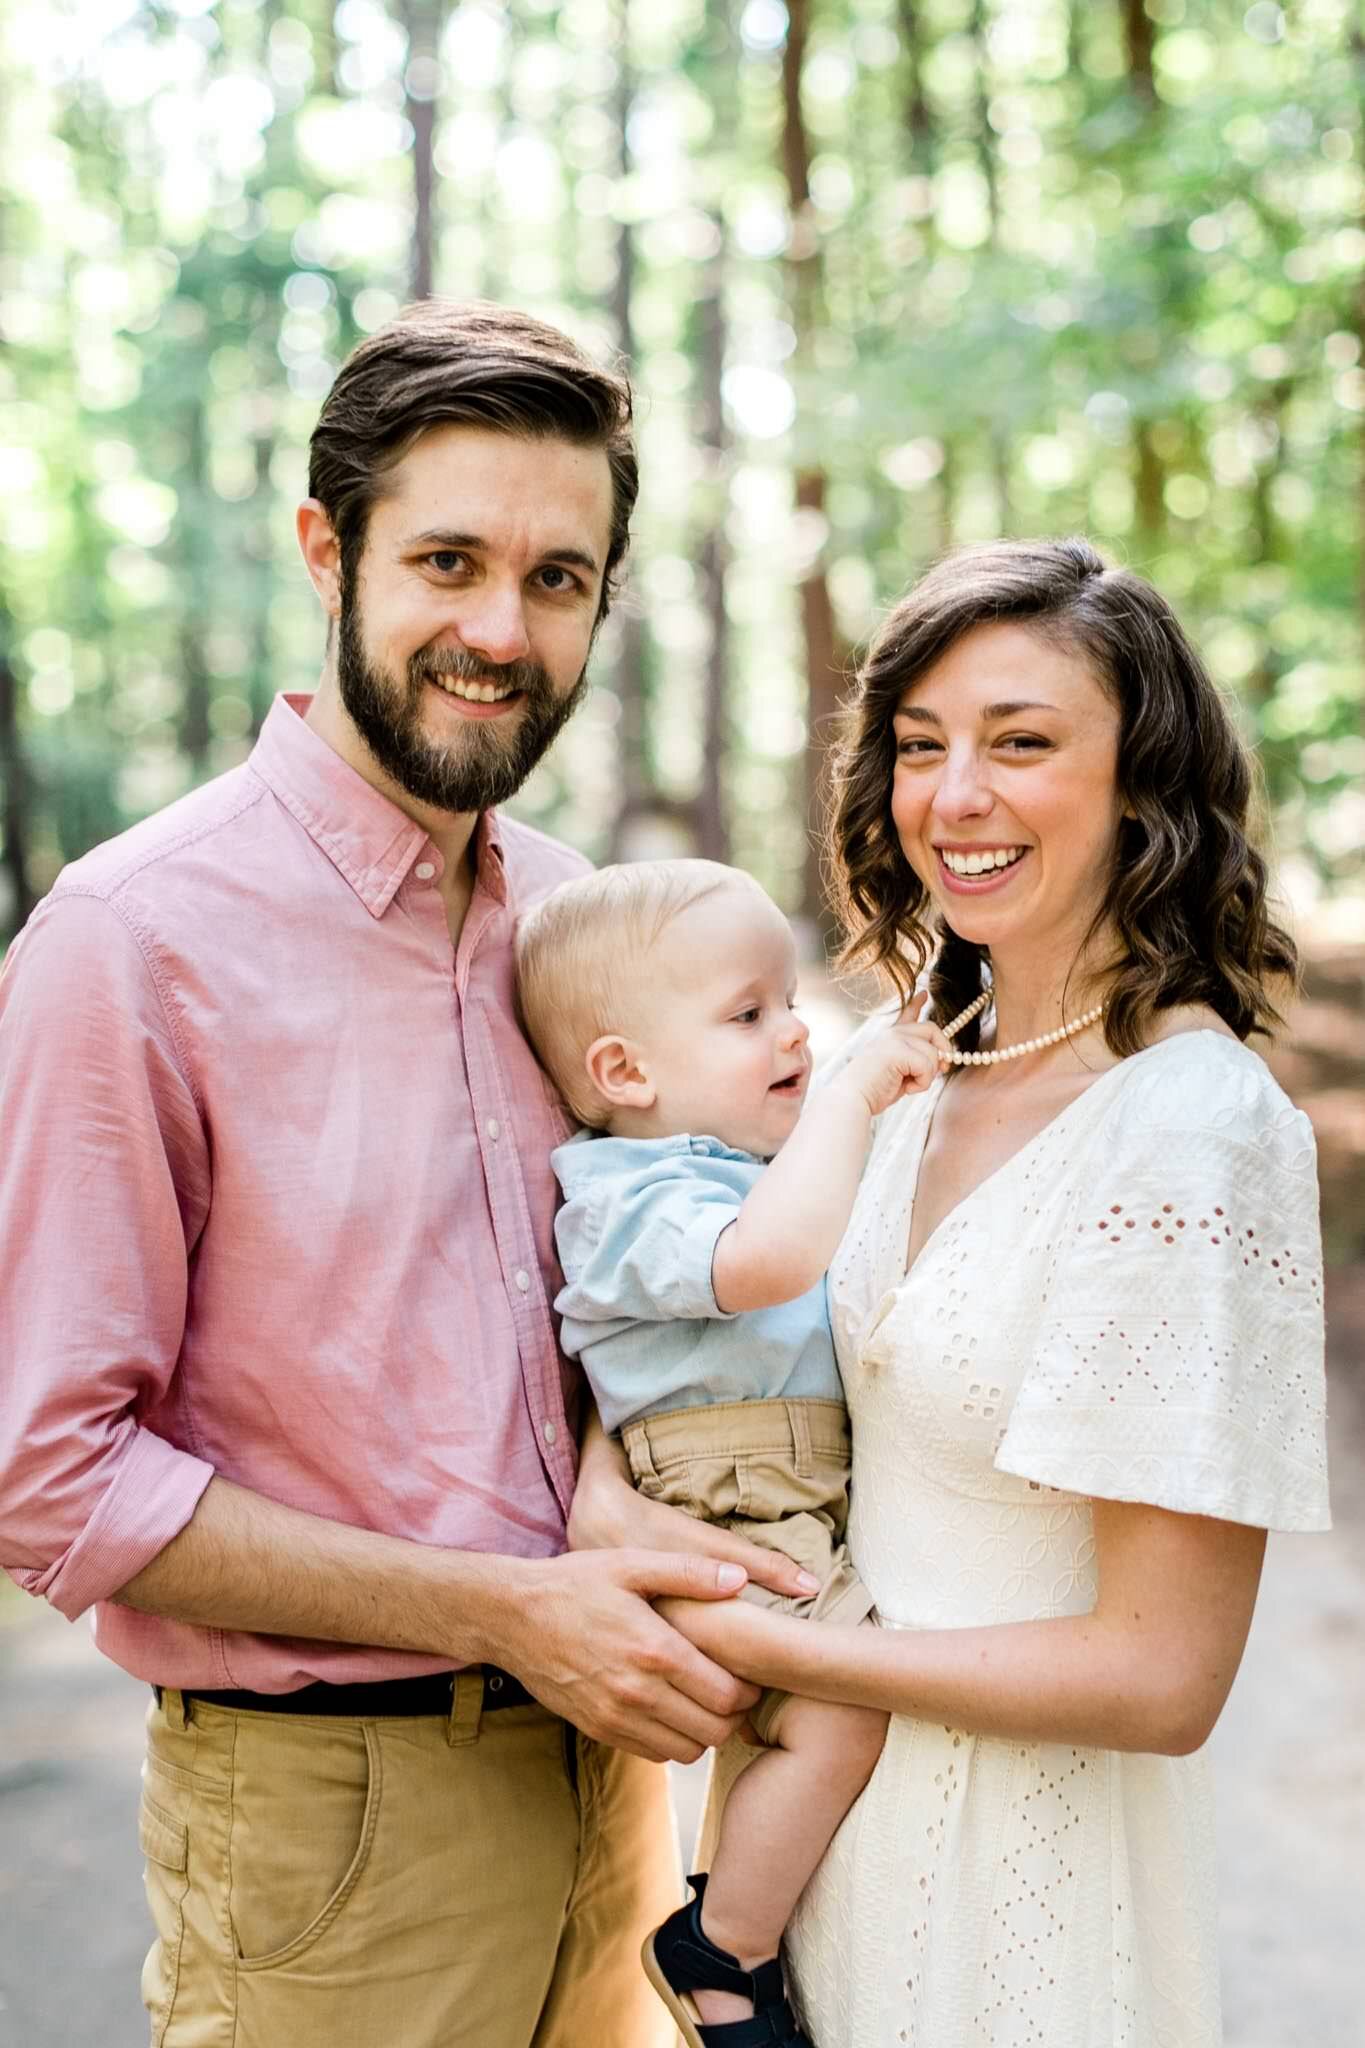 Raleigh Family Photographer | By G. Lin Photography | Umstead Park | Outdoor family photo in natural forest environment